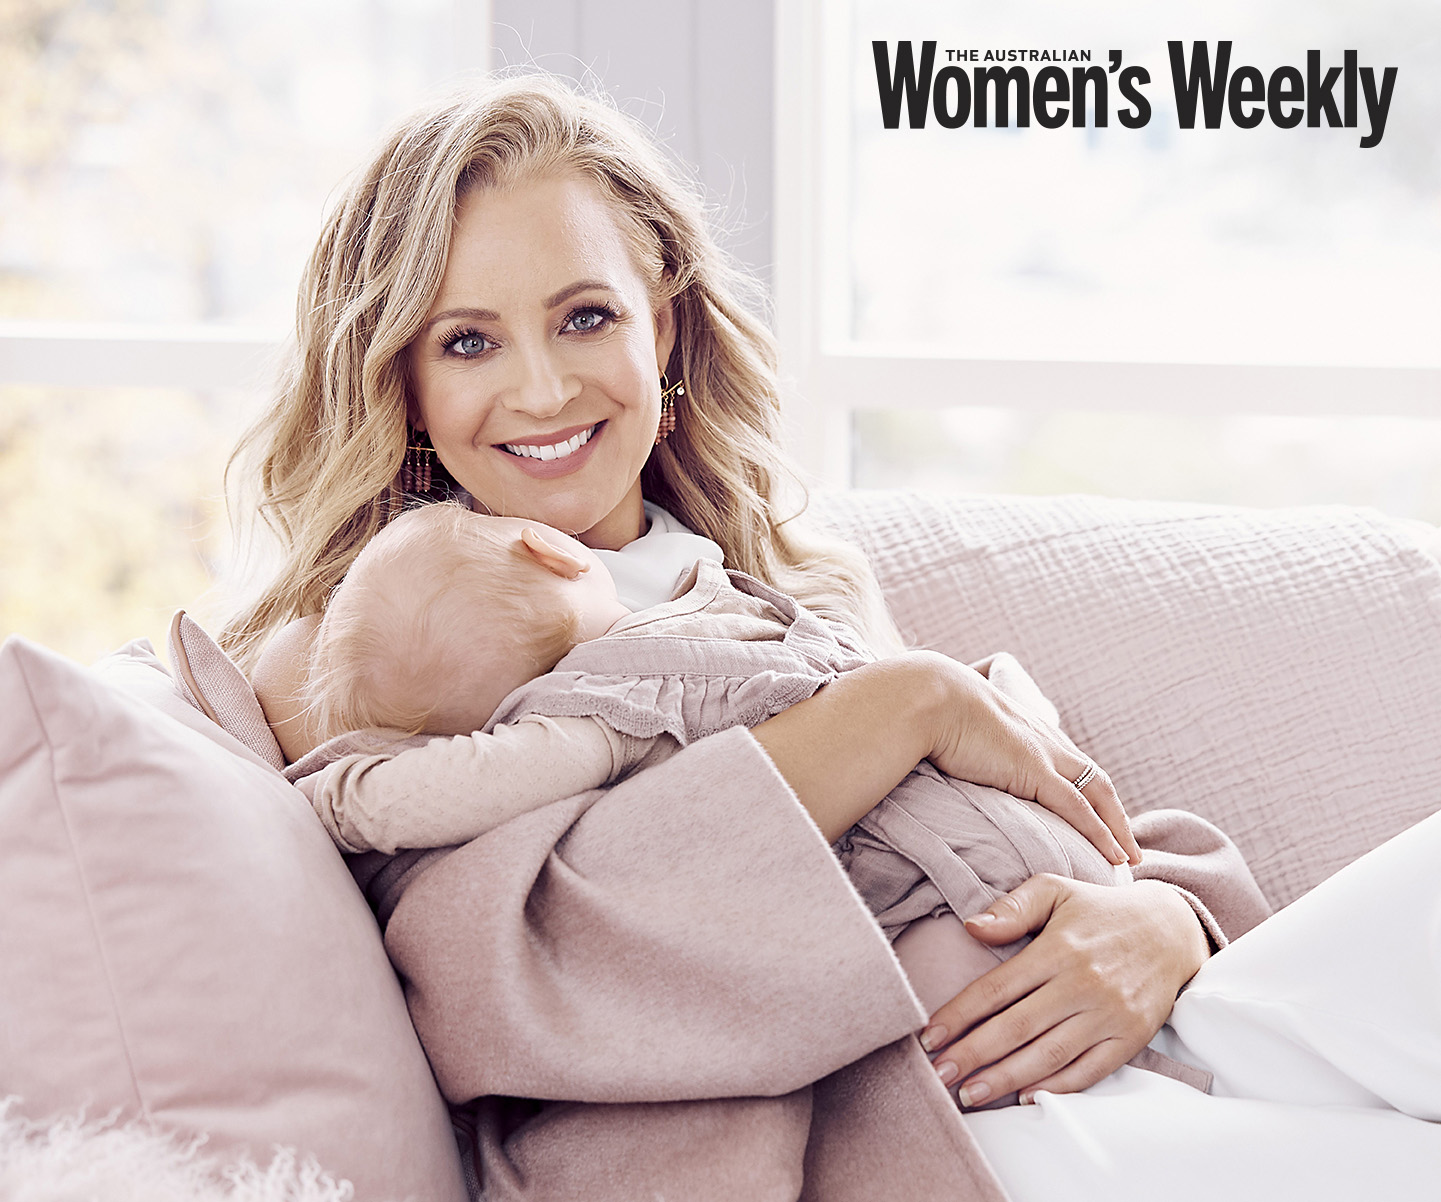 EXCLUSIVE: Why Carrie Bickmore’s brutal honesty about motherhood is a gift to other women